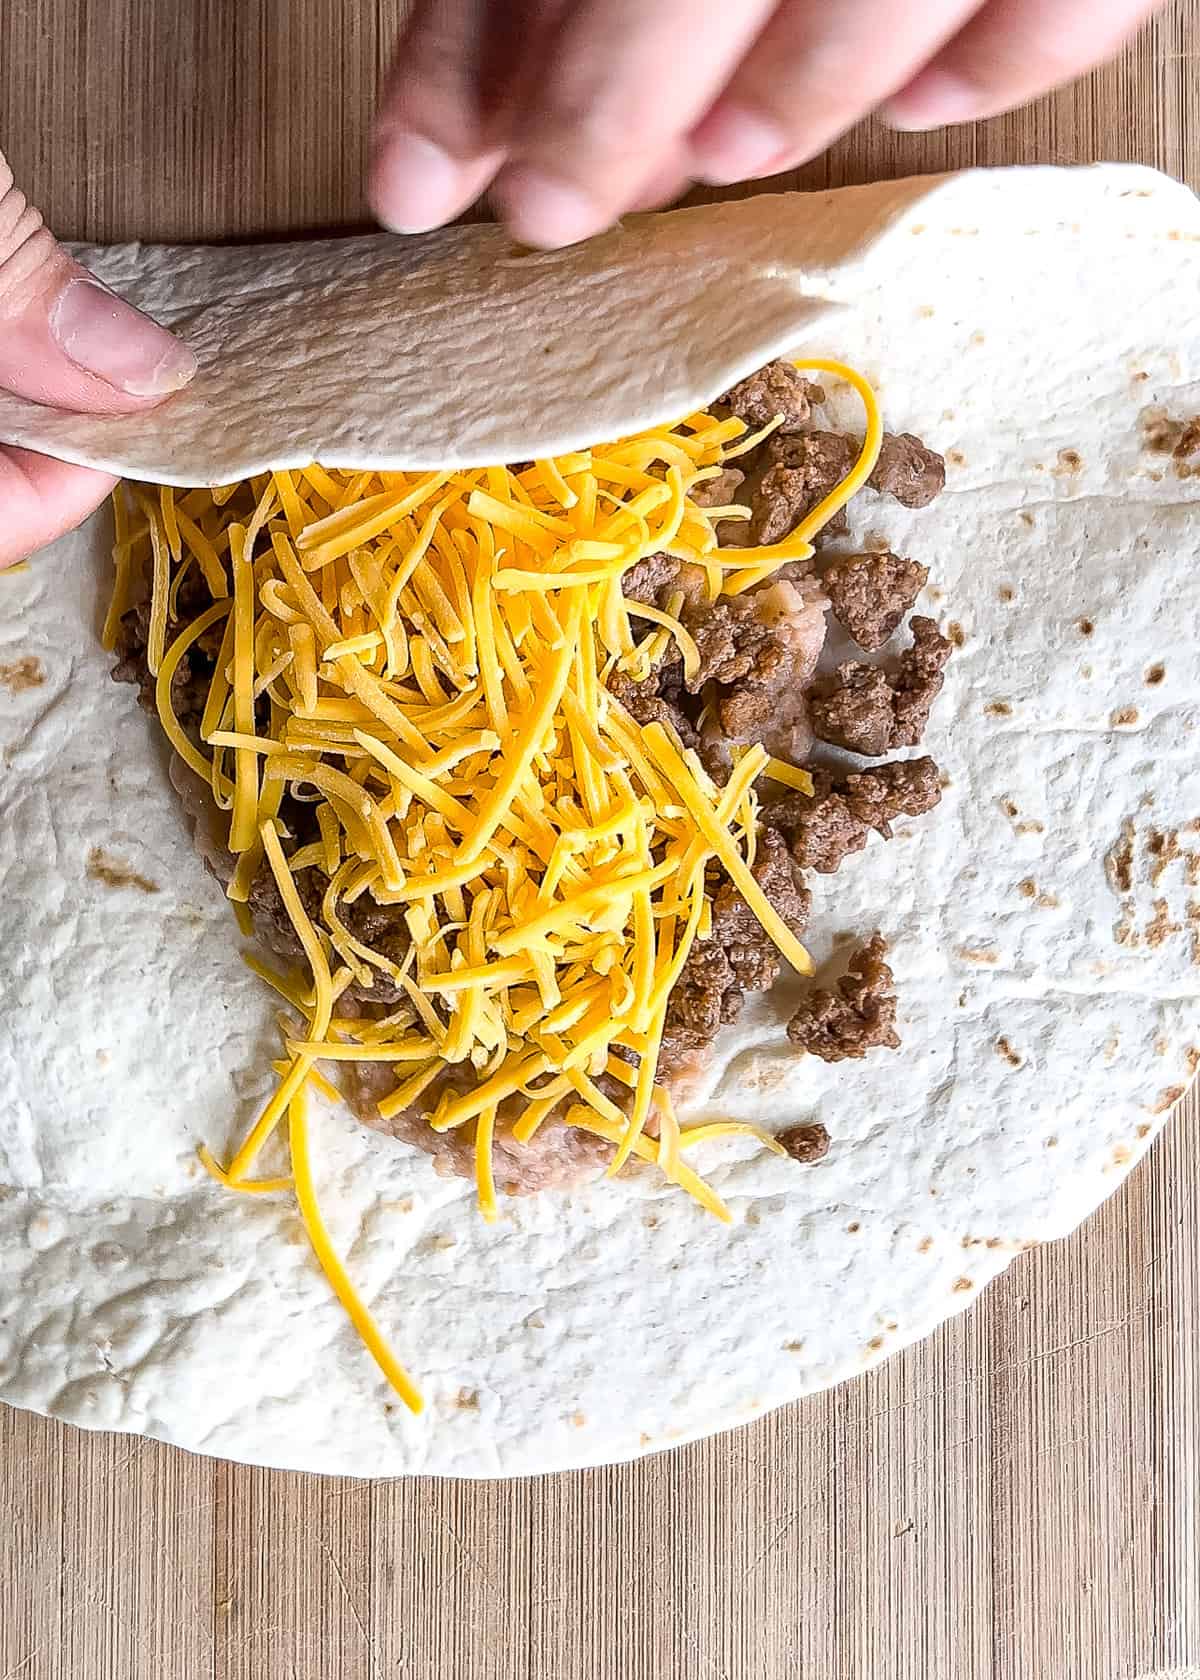 Beef and cheddar chimichangas